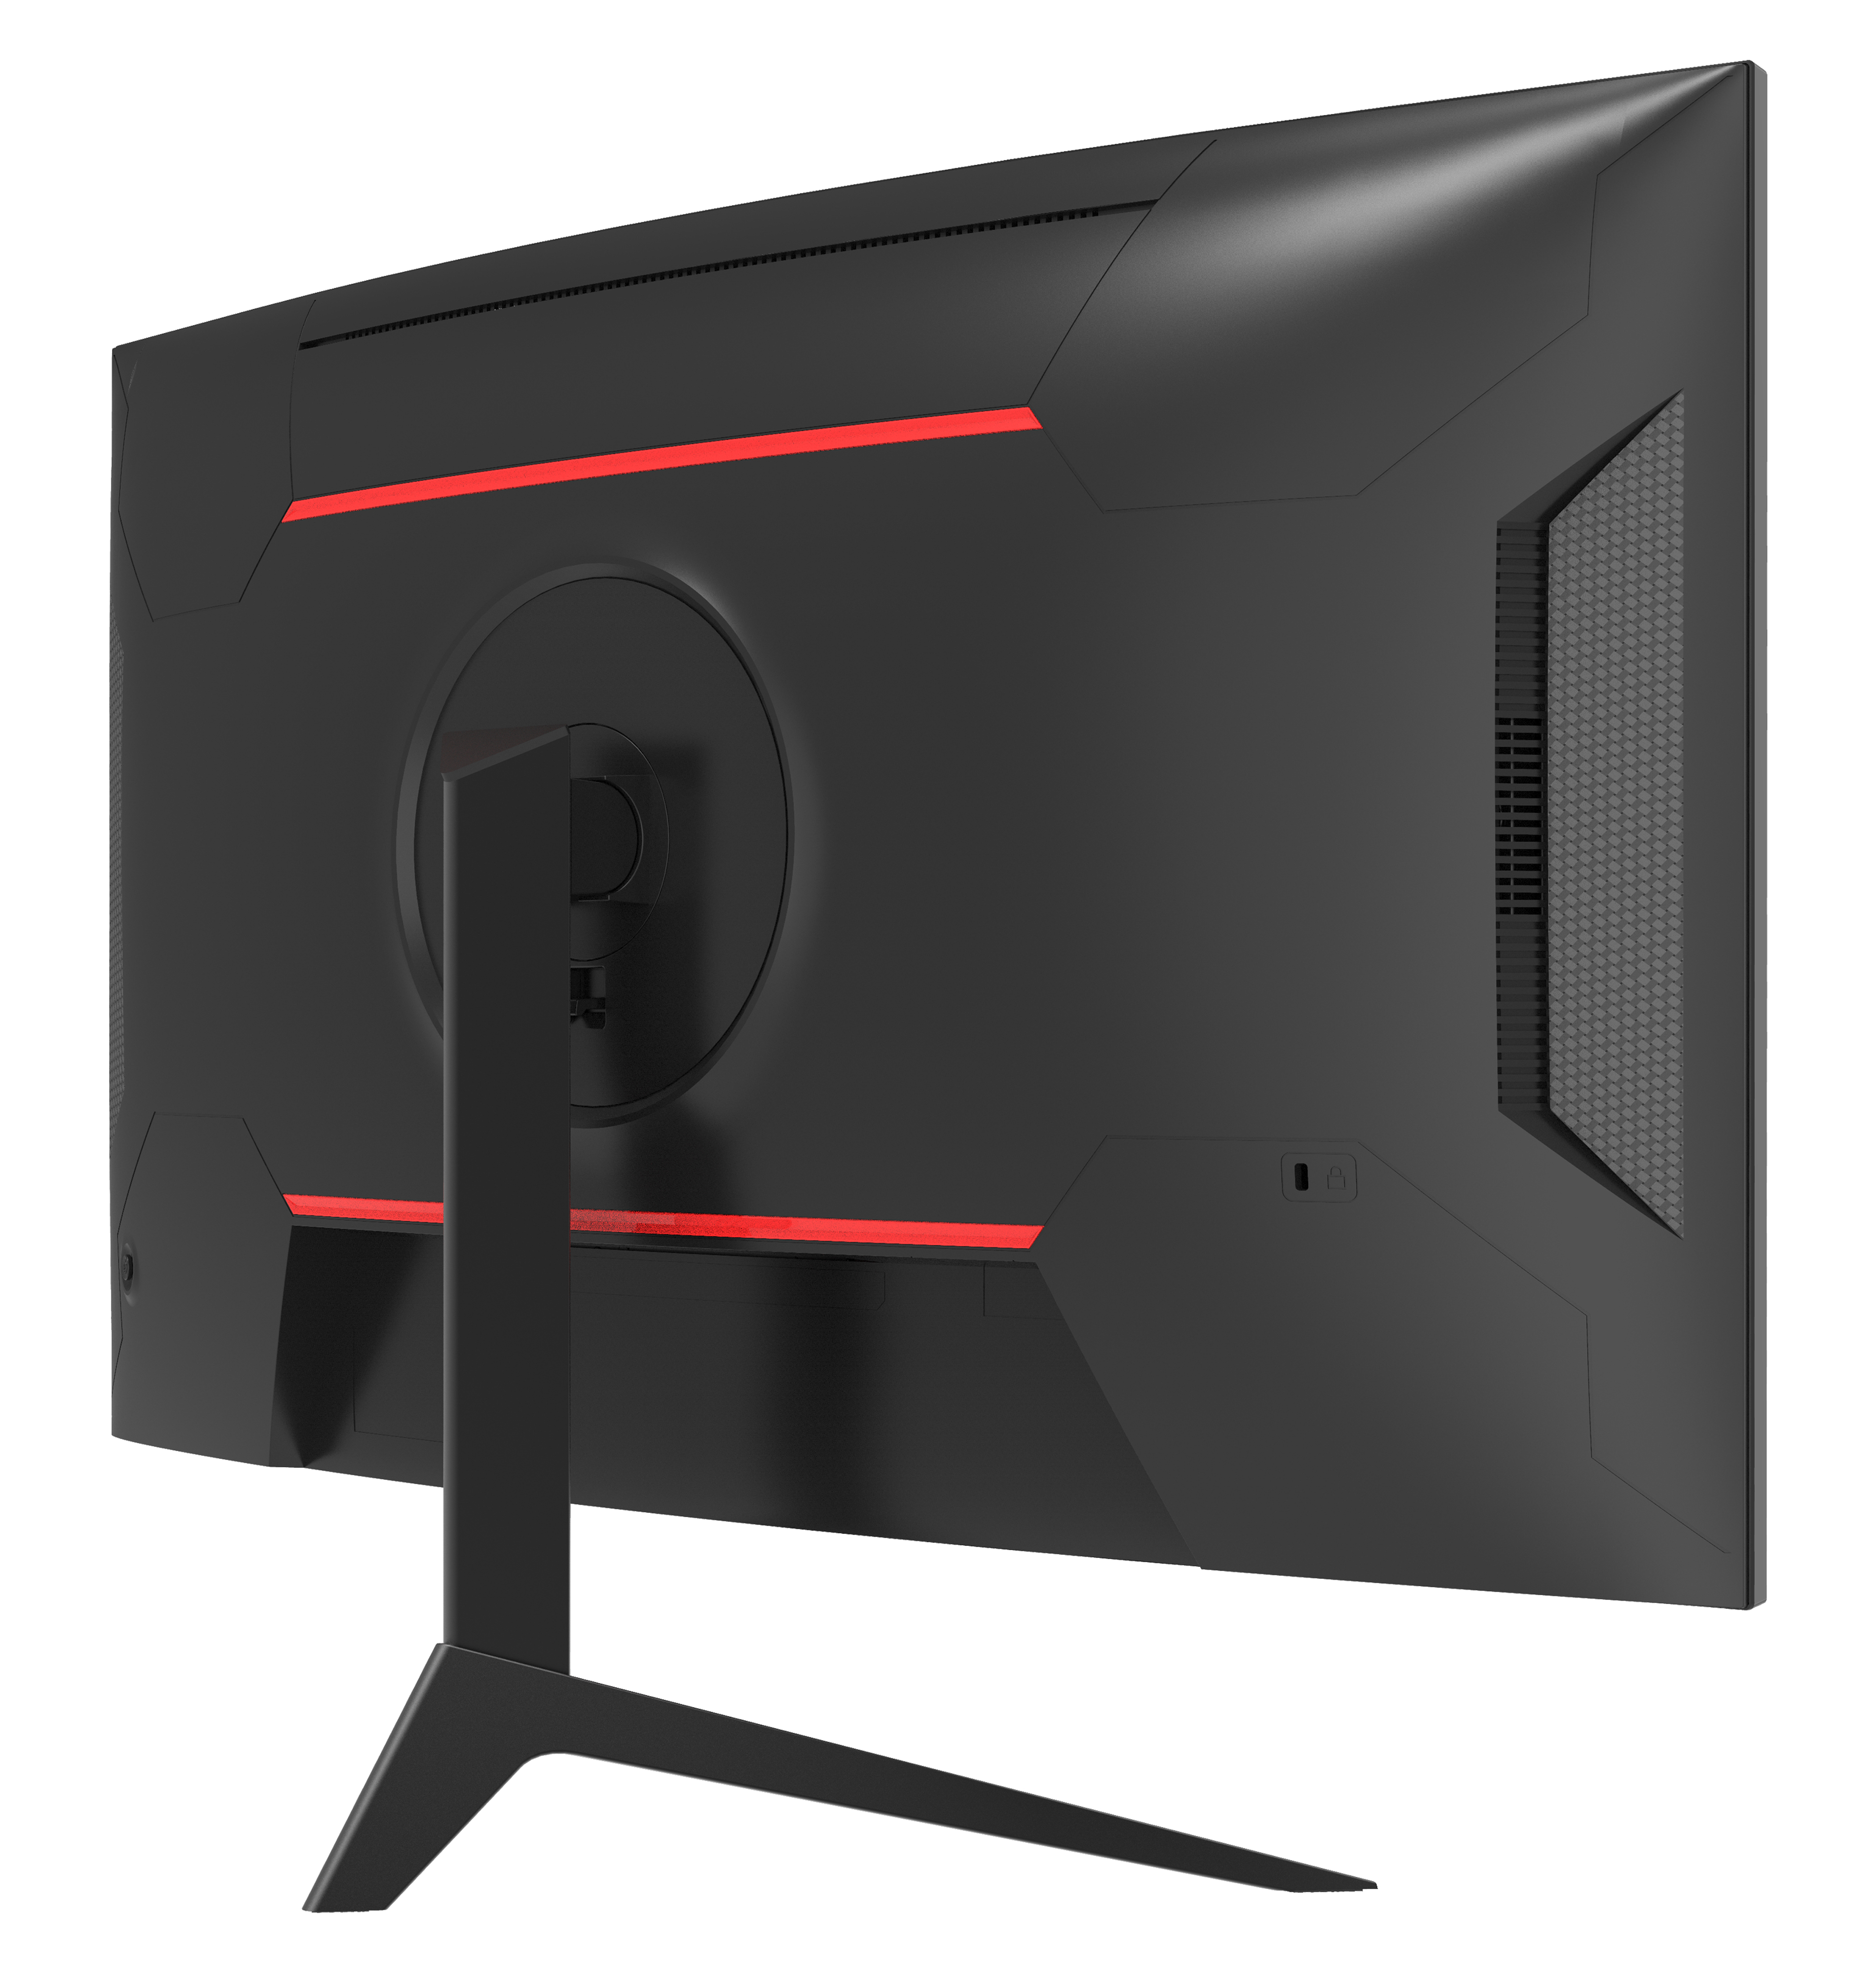 POWER LC 165 ) Monitor 27 Hz , Reaktionszeit LC-M27-FHD-165-C-V3 Gaming Full-HD (1 ms Zoll